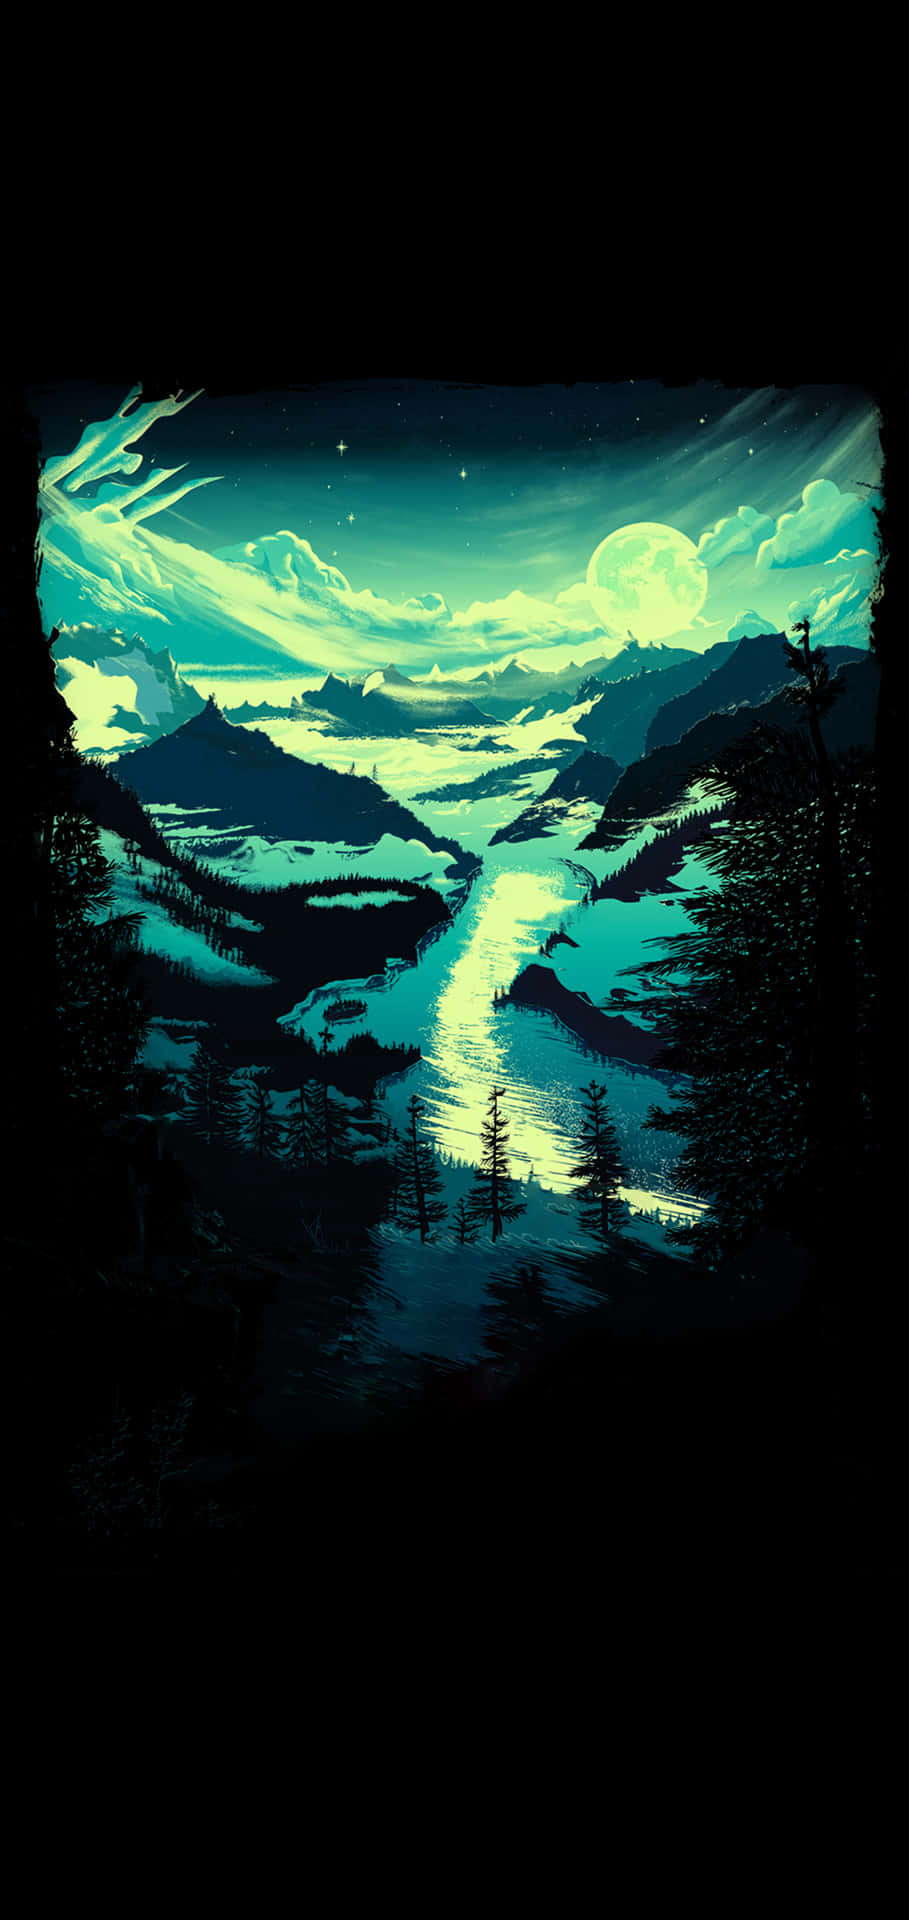 A Green Night Sky With Mountains And A River Wallpaper